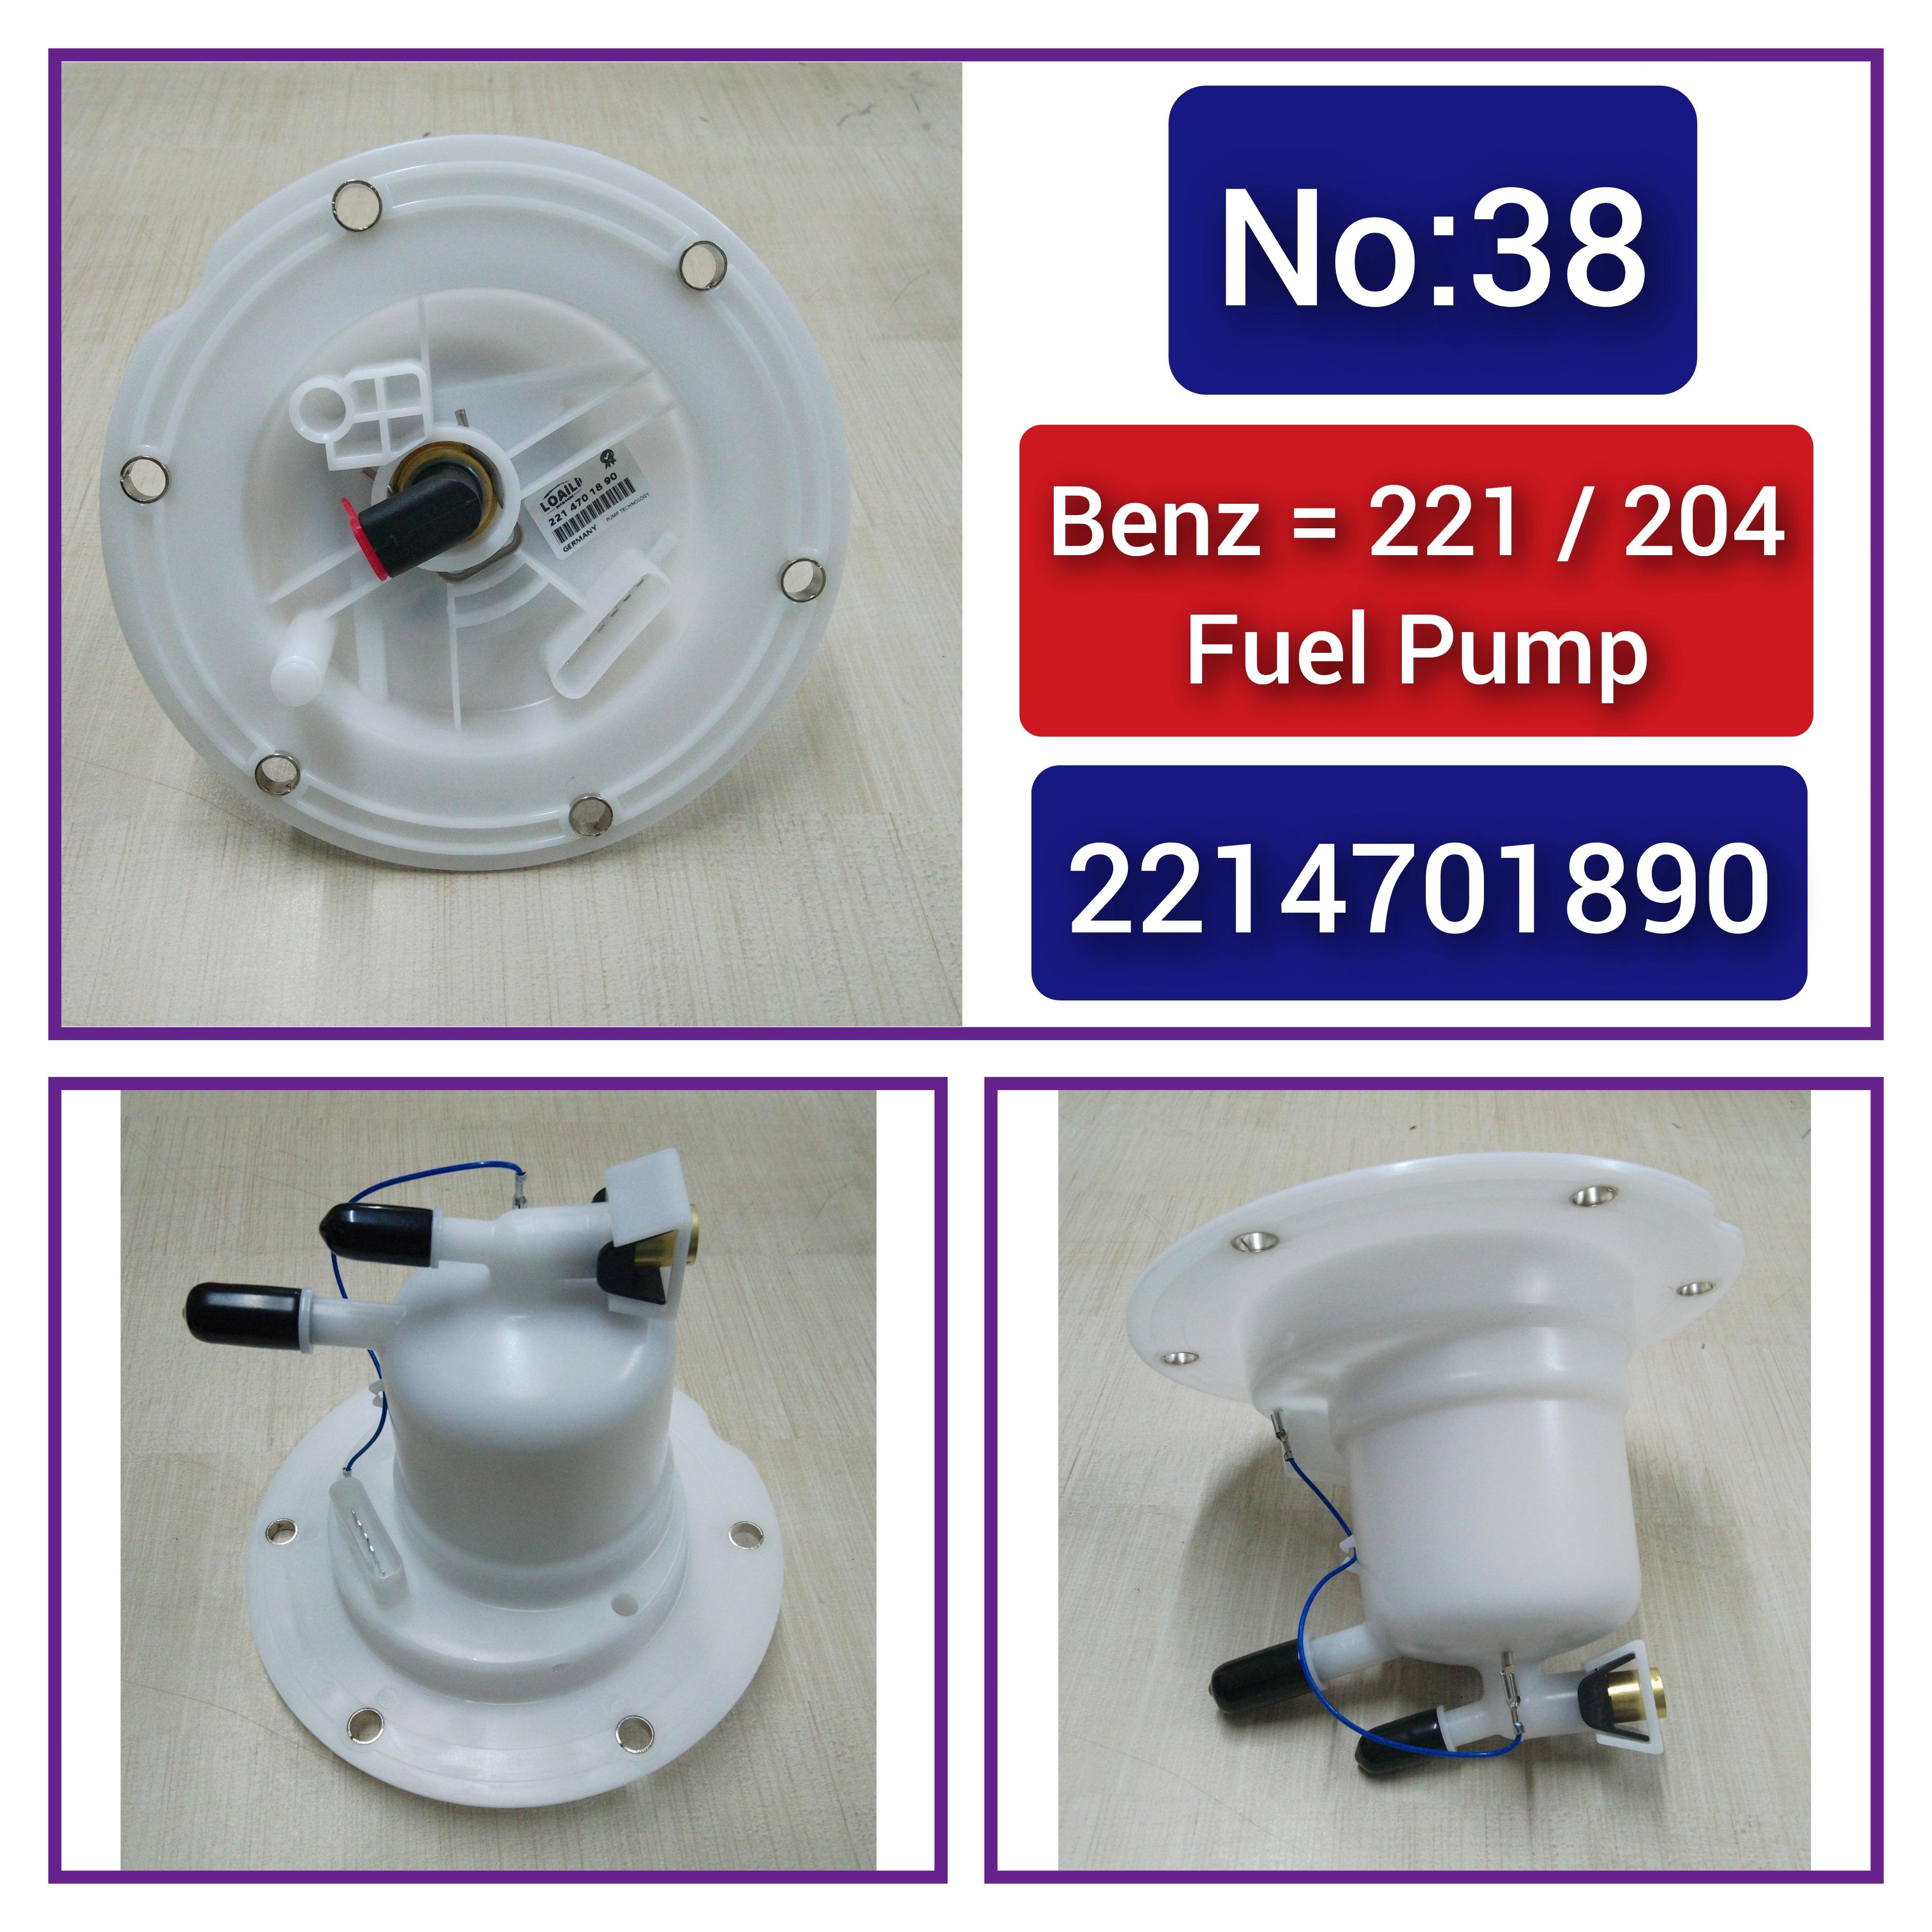 Fuel Pump Assembly 2214701890 Fit For MERCEDES-BENZ C-CLASS W204 & S-CLASS W221 Tag-F-38